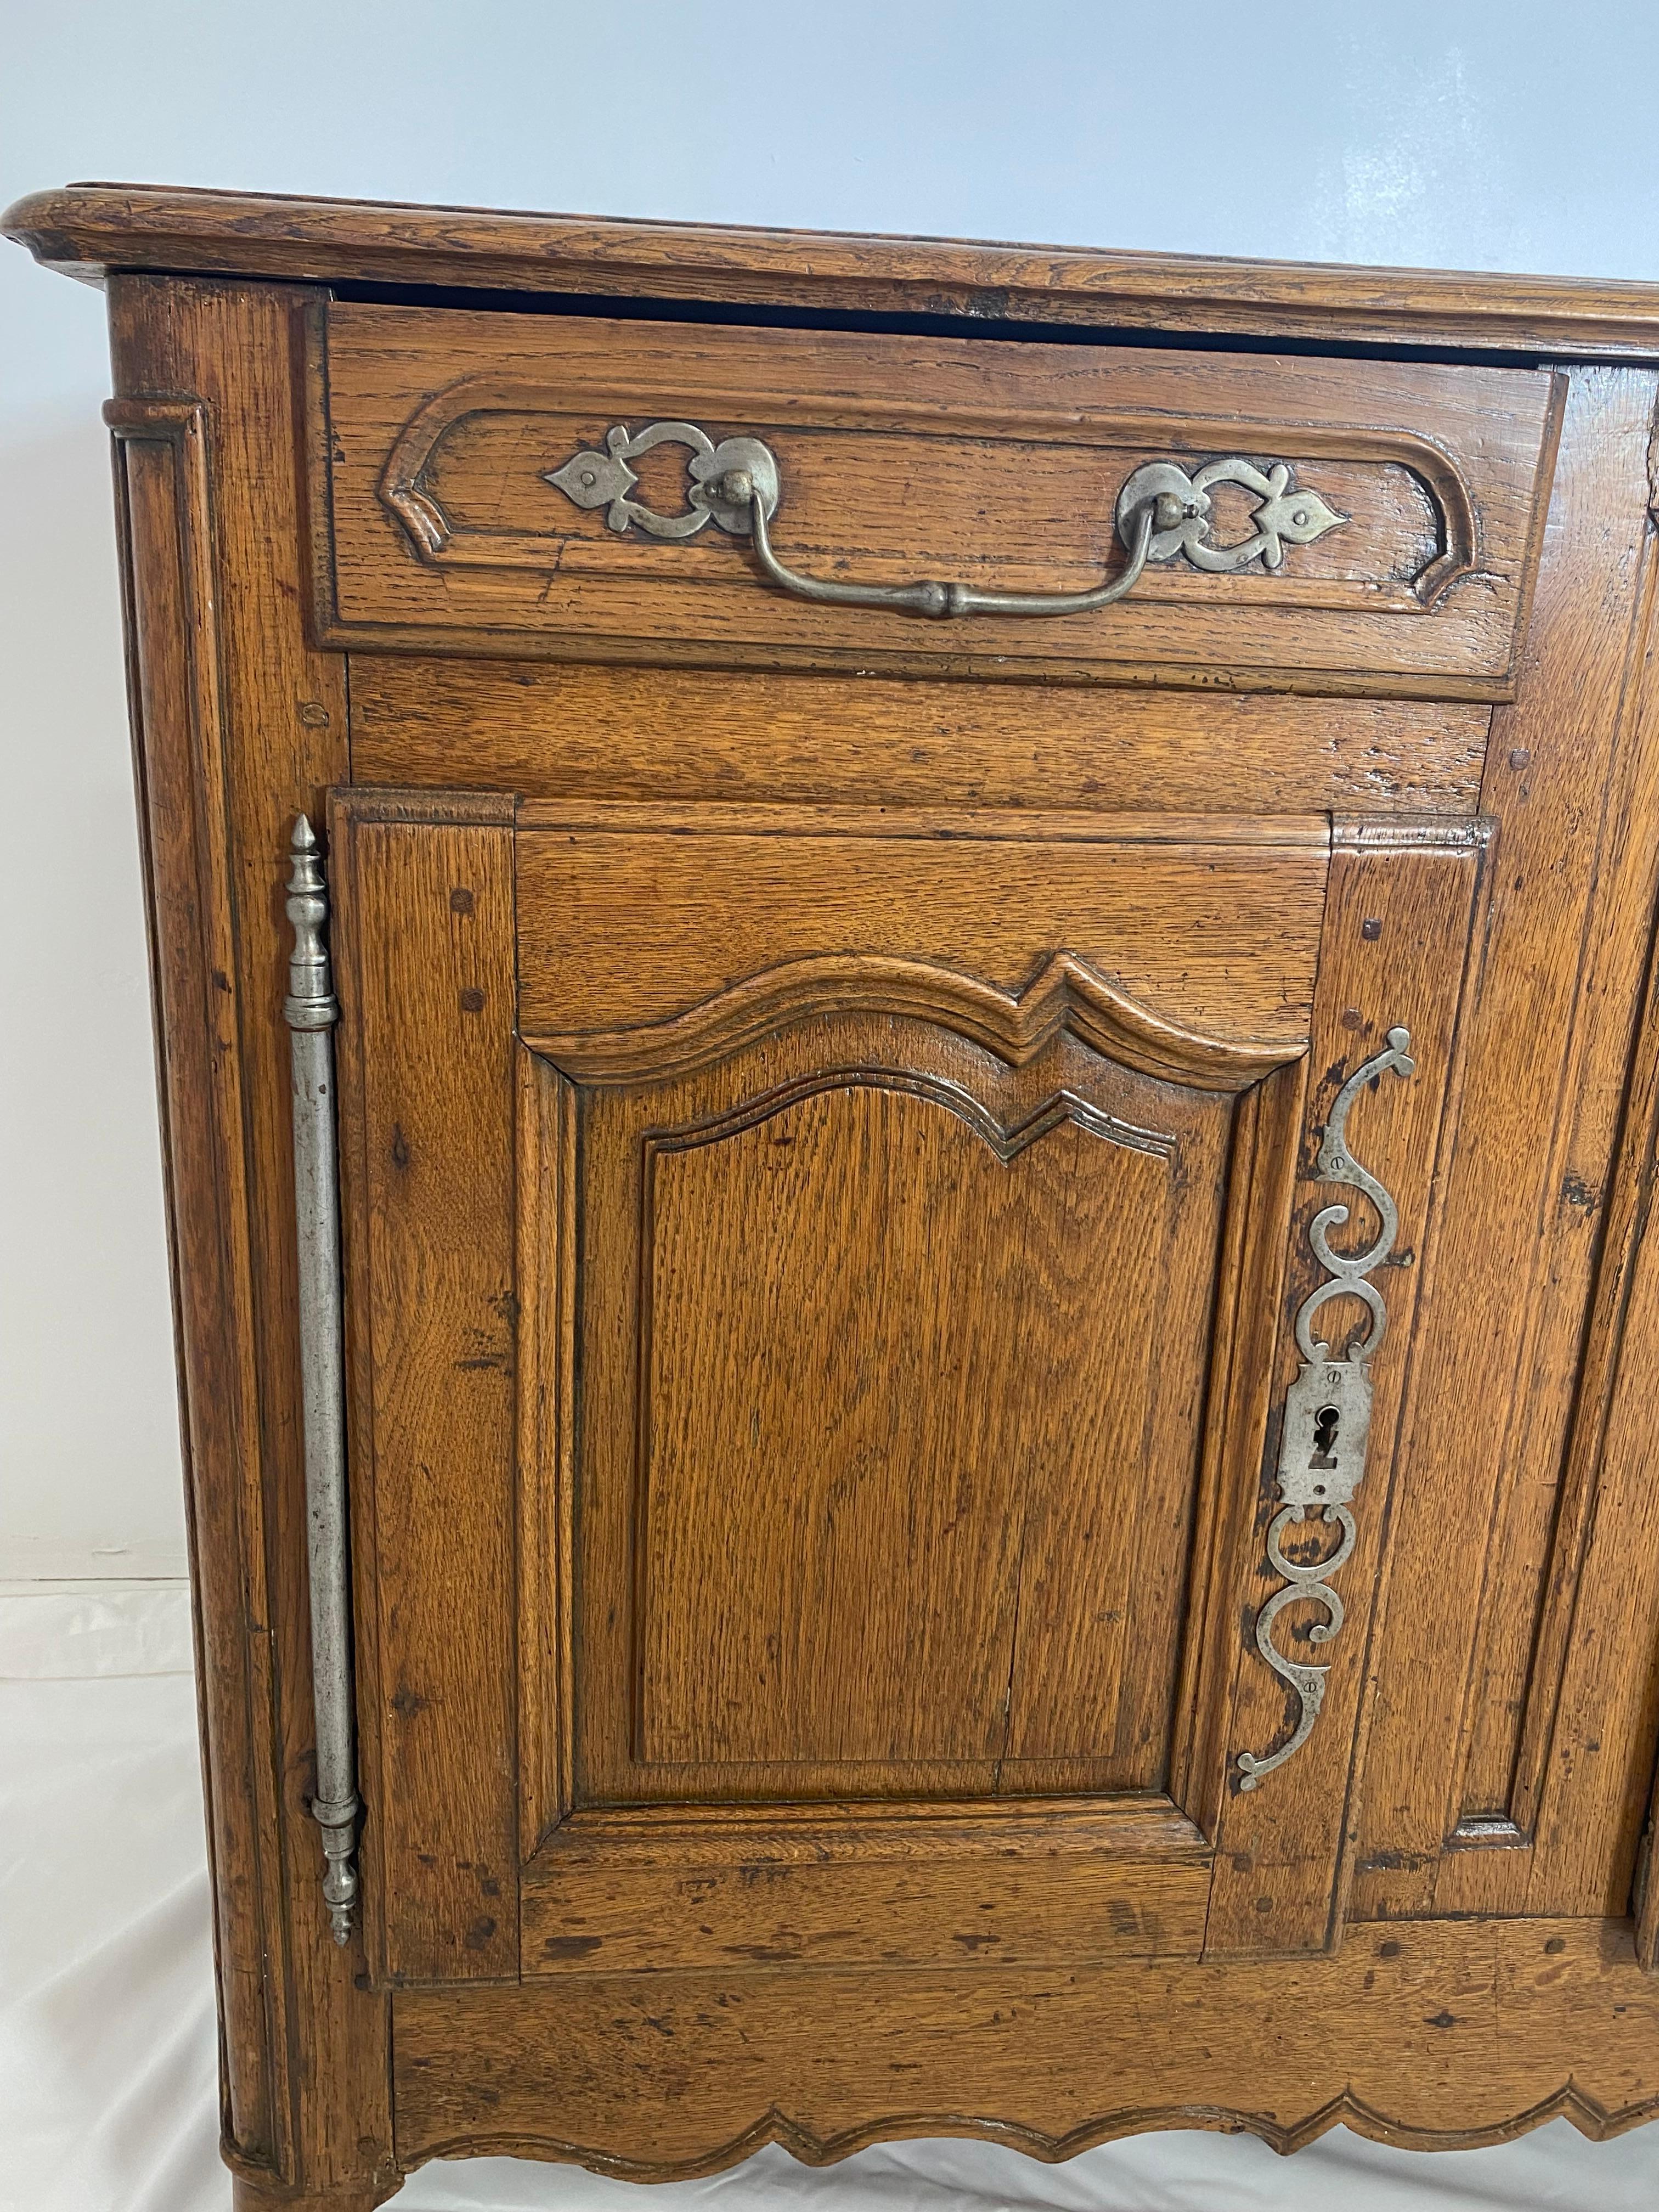 Eighteenth century period Enfilade in light oak. circa 1760
Solid oak, beautifully hand carved, dovetail construction, original hardware, handsomely aged formidable finish.